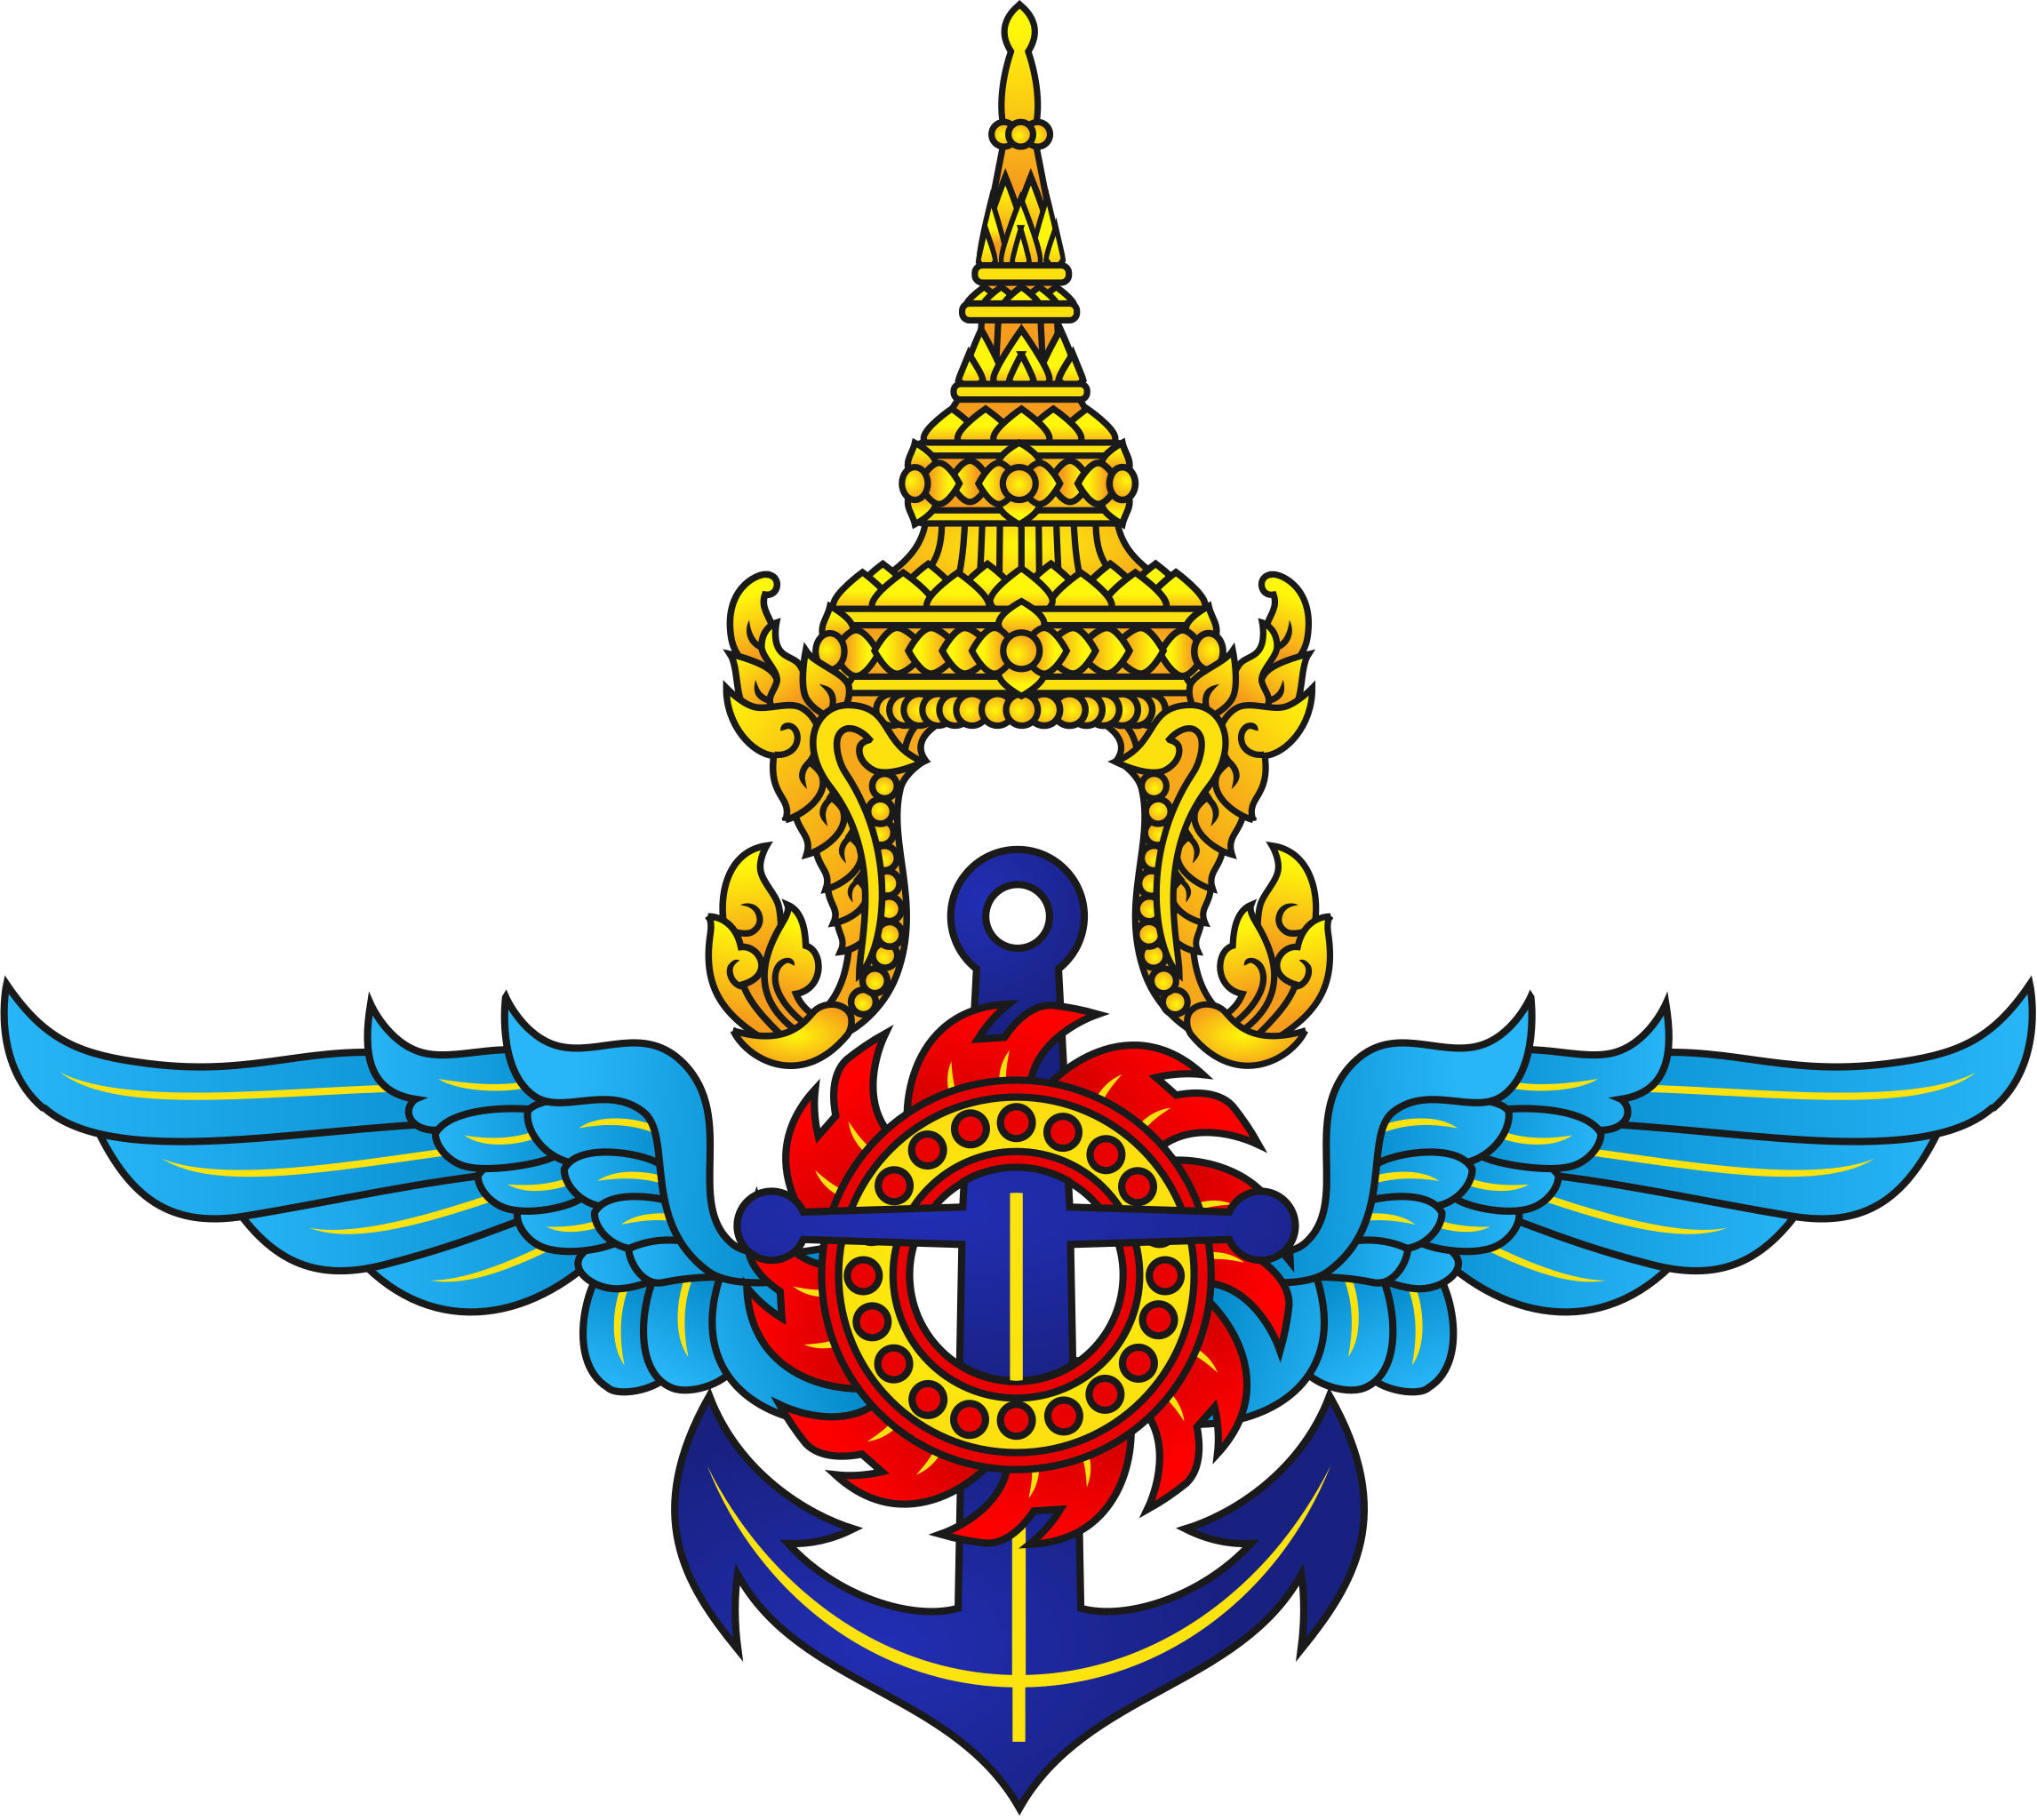 2292px-Emblem_of_the_Ministry_of_Defence_of_Thailand.svg.png